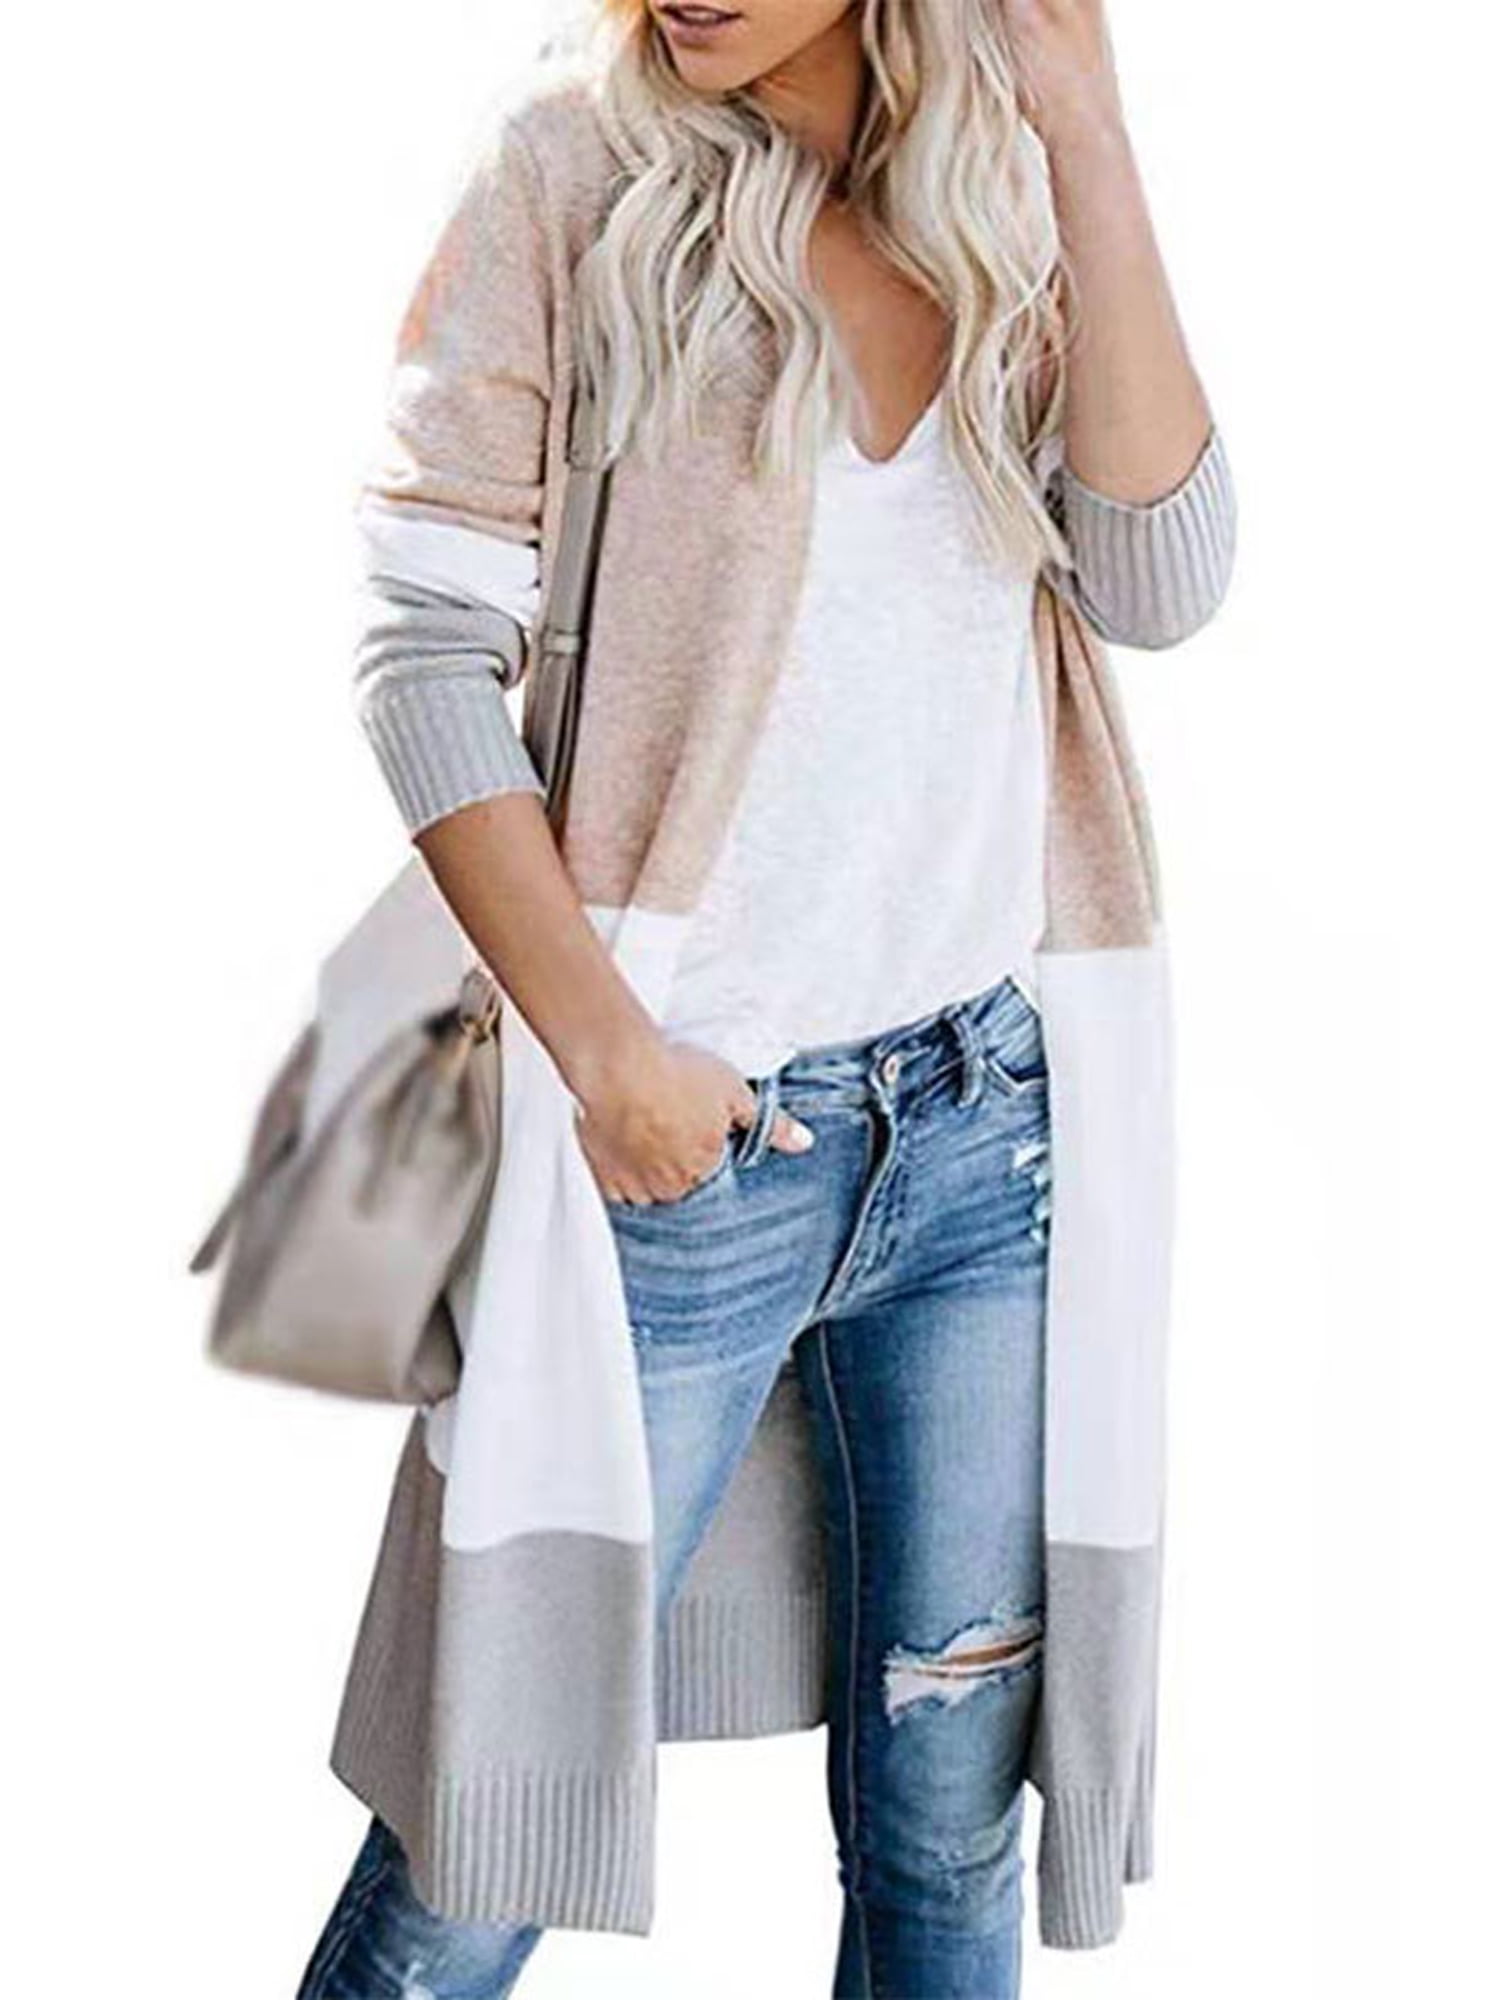 Wodstyle - Women's Knitted Long Sleeve Cardigans Open Front Casual Boho